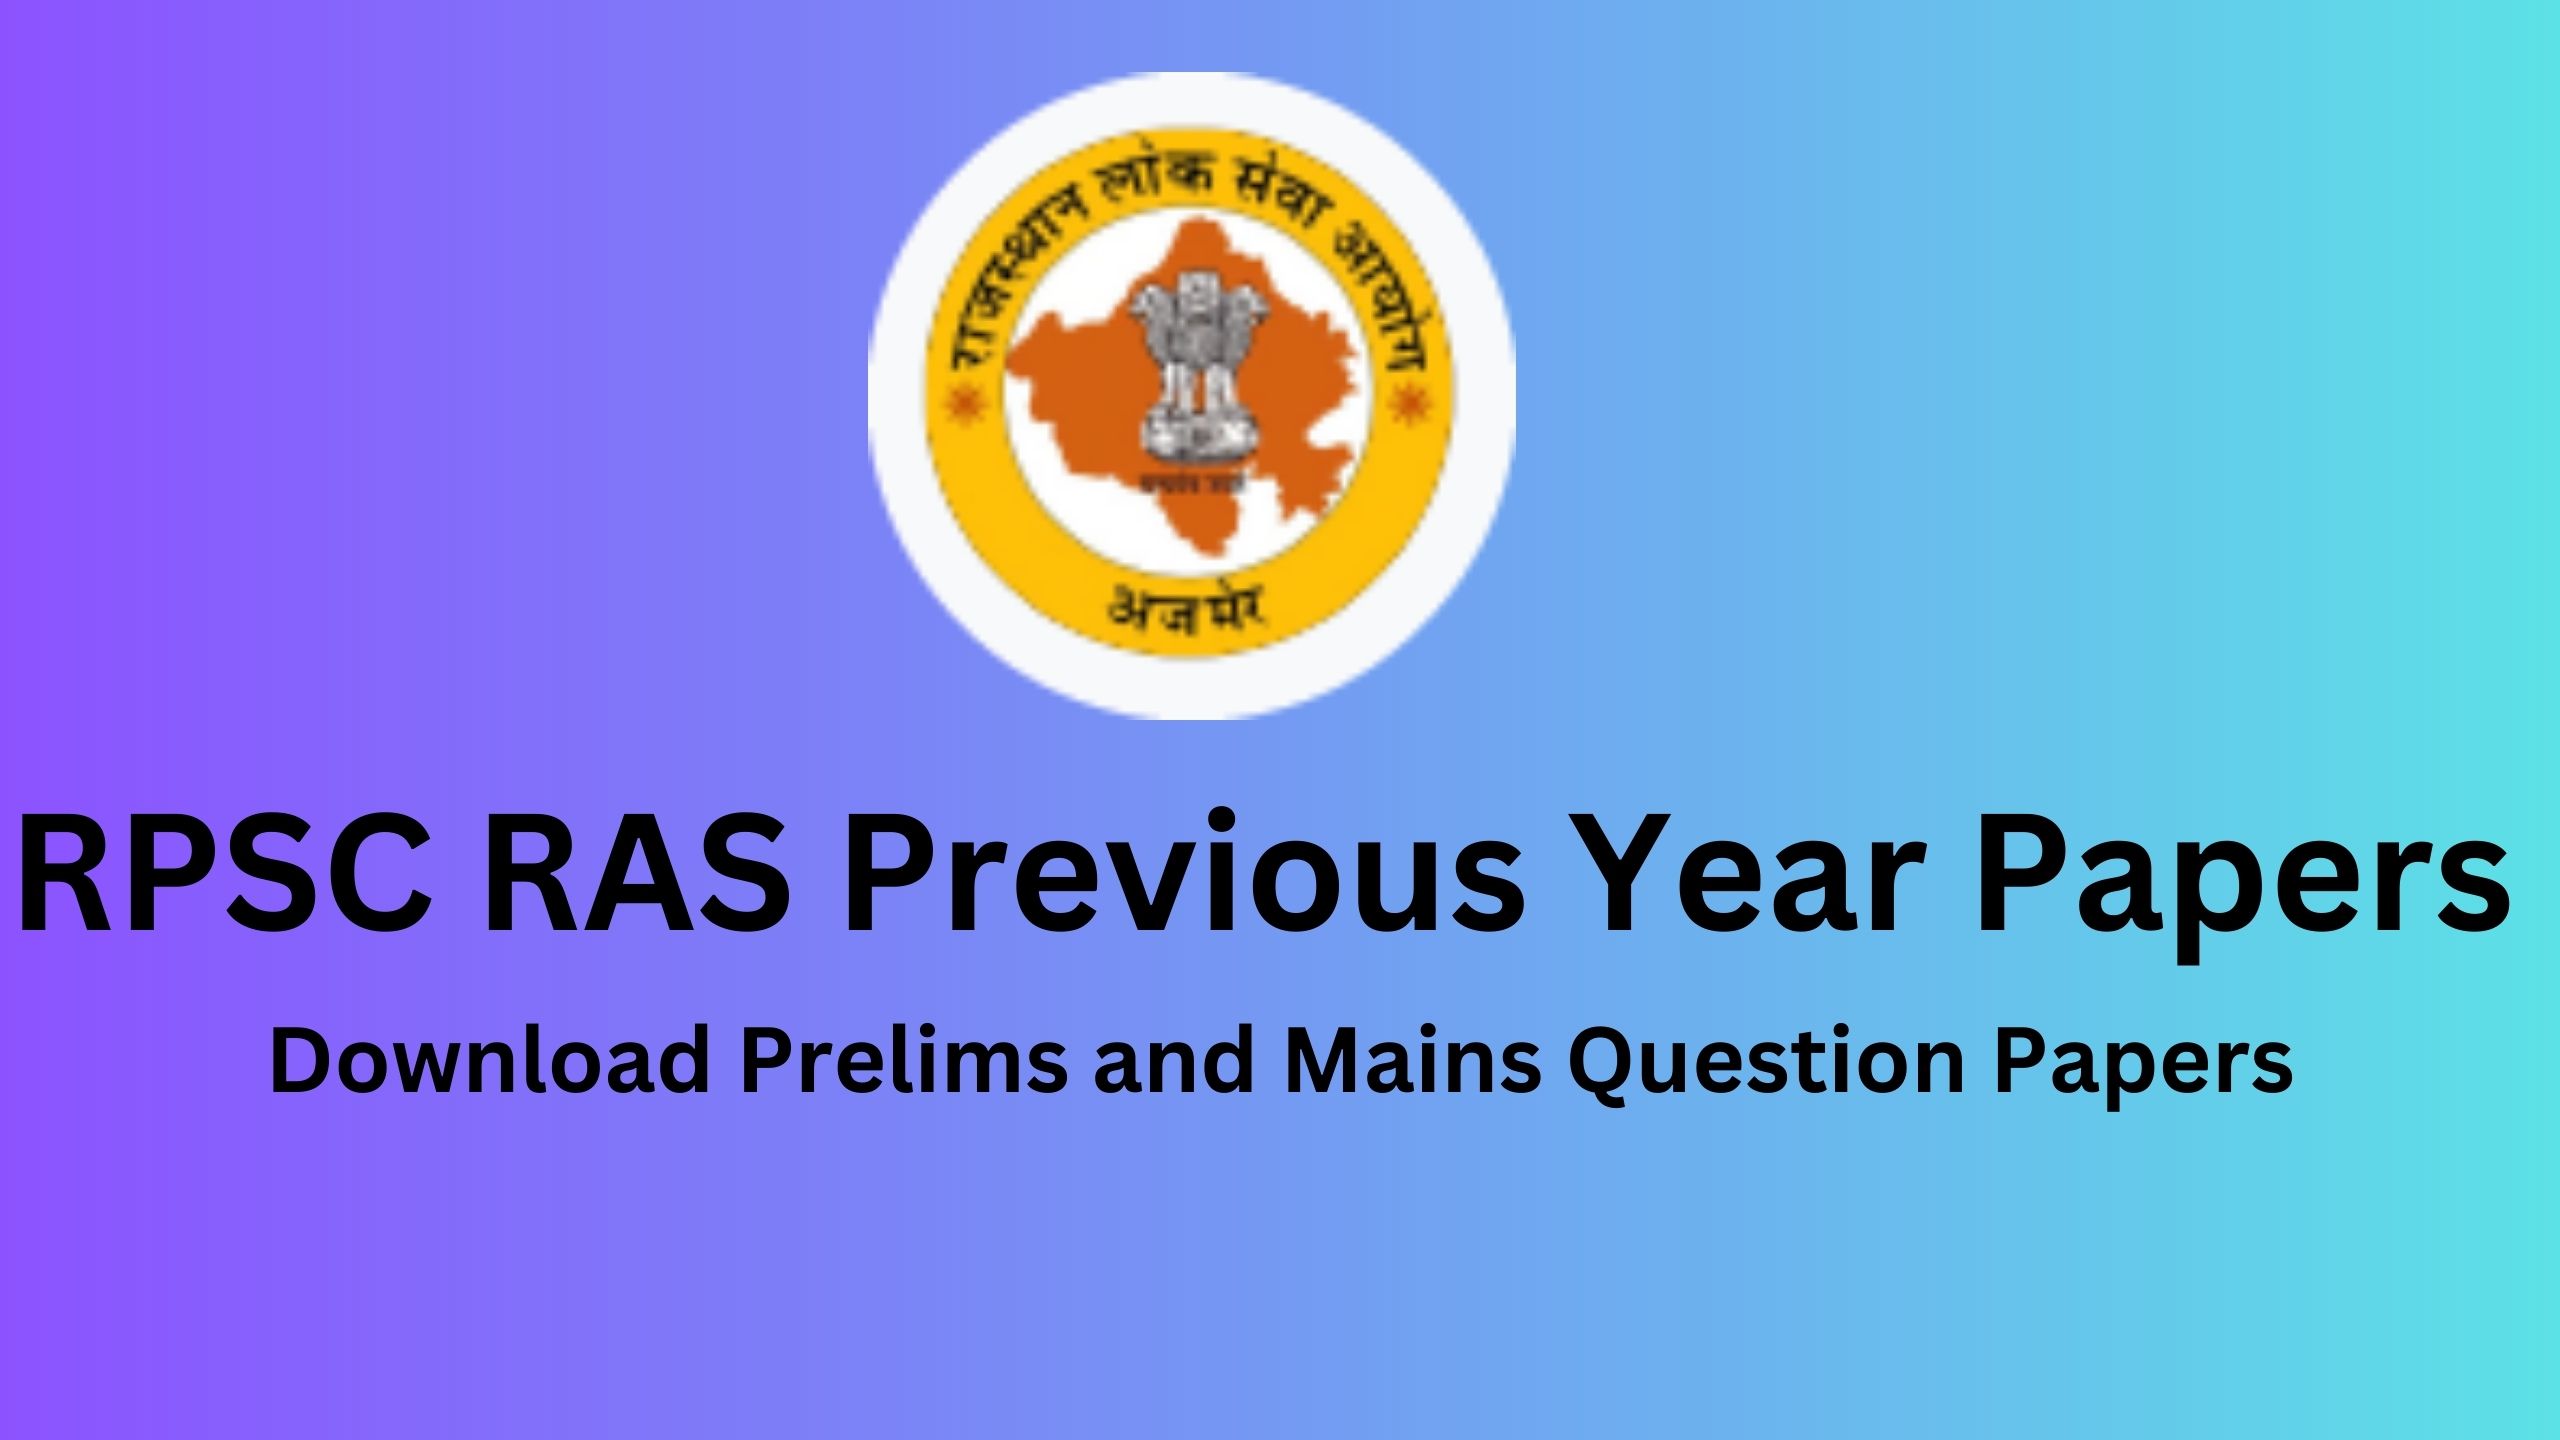 RPSC RAS Previous Year Papers